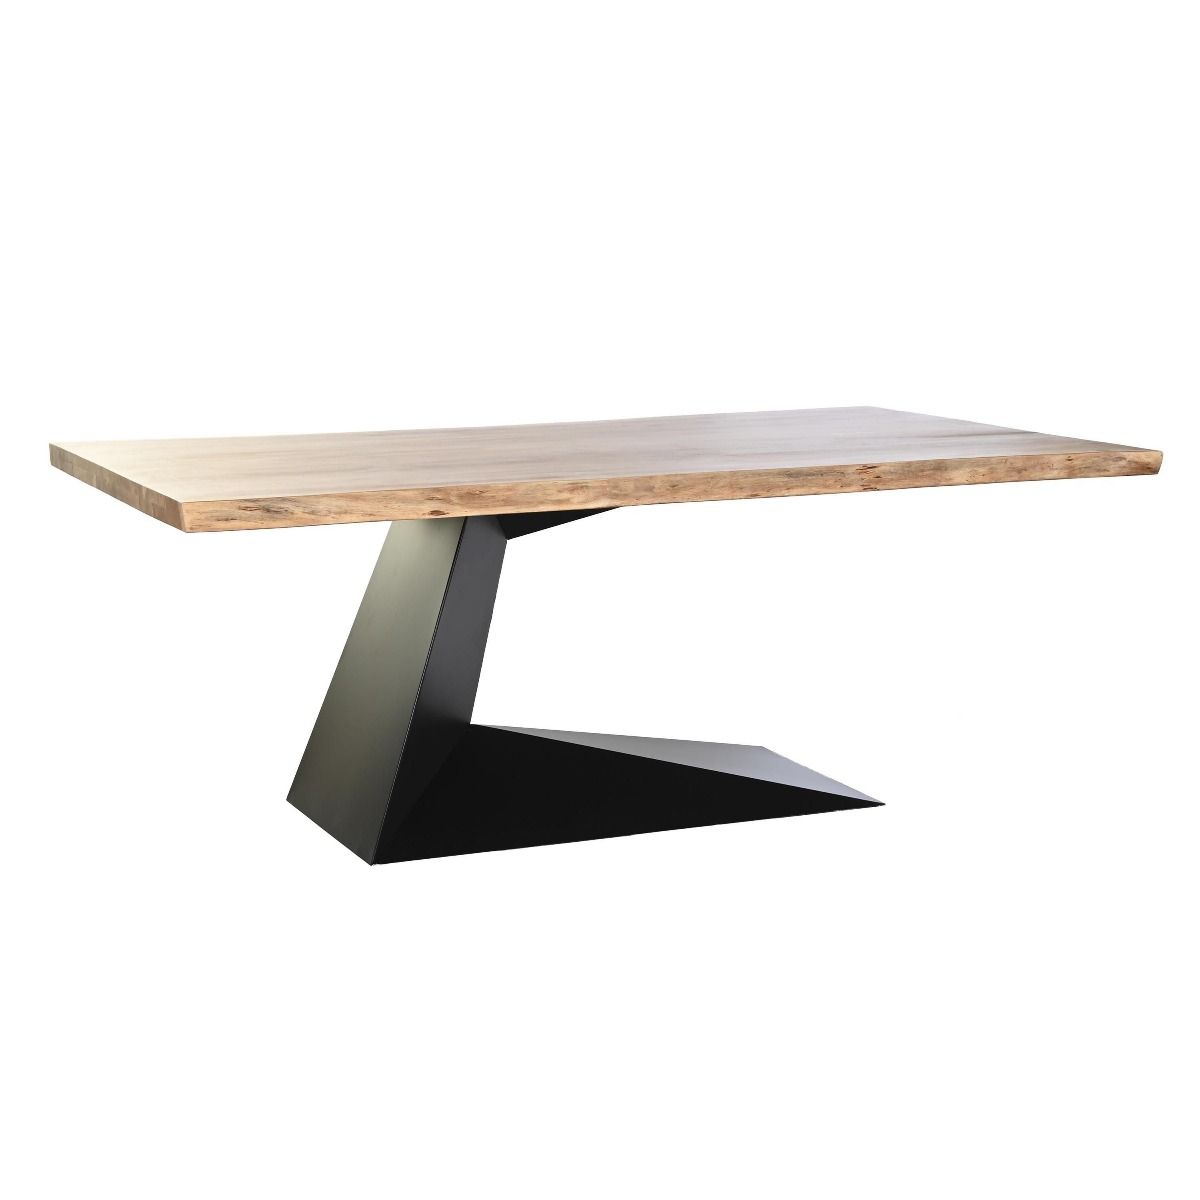 FLOATING dining table